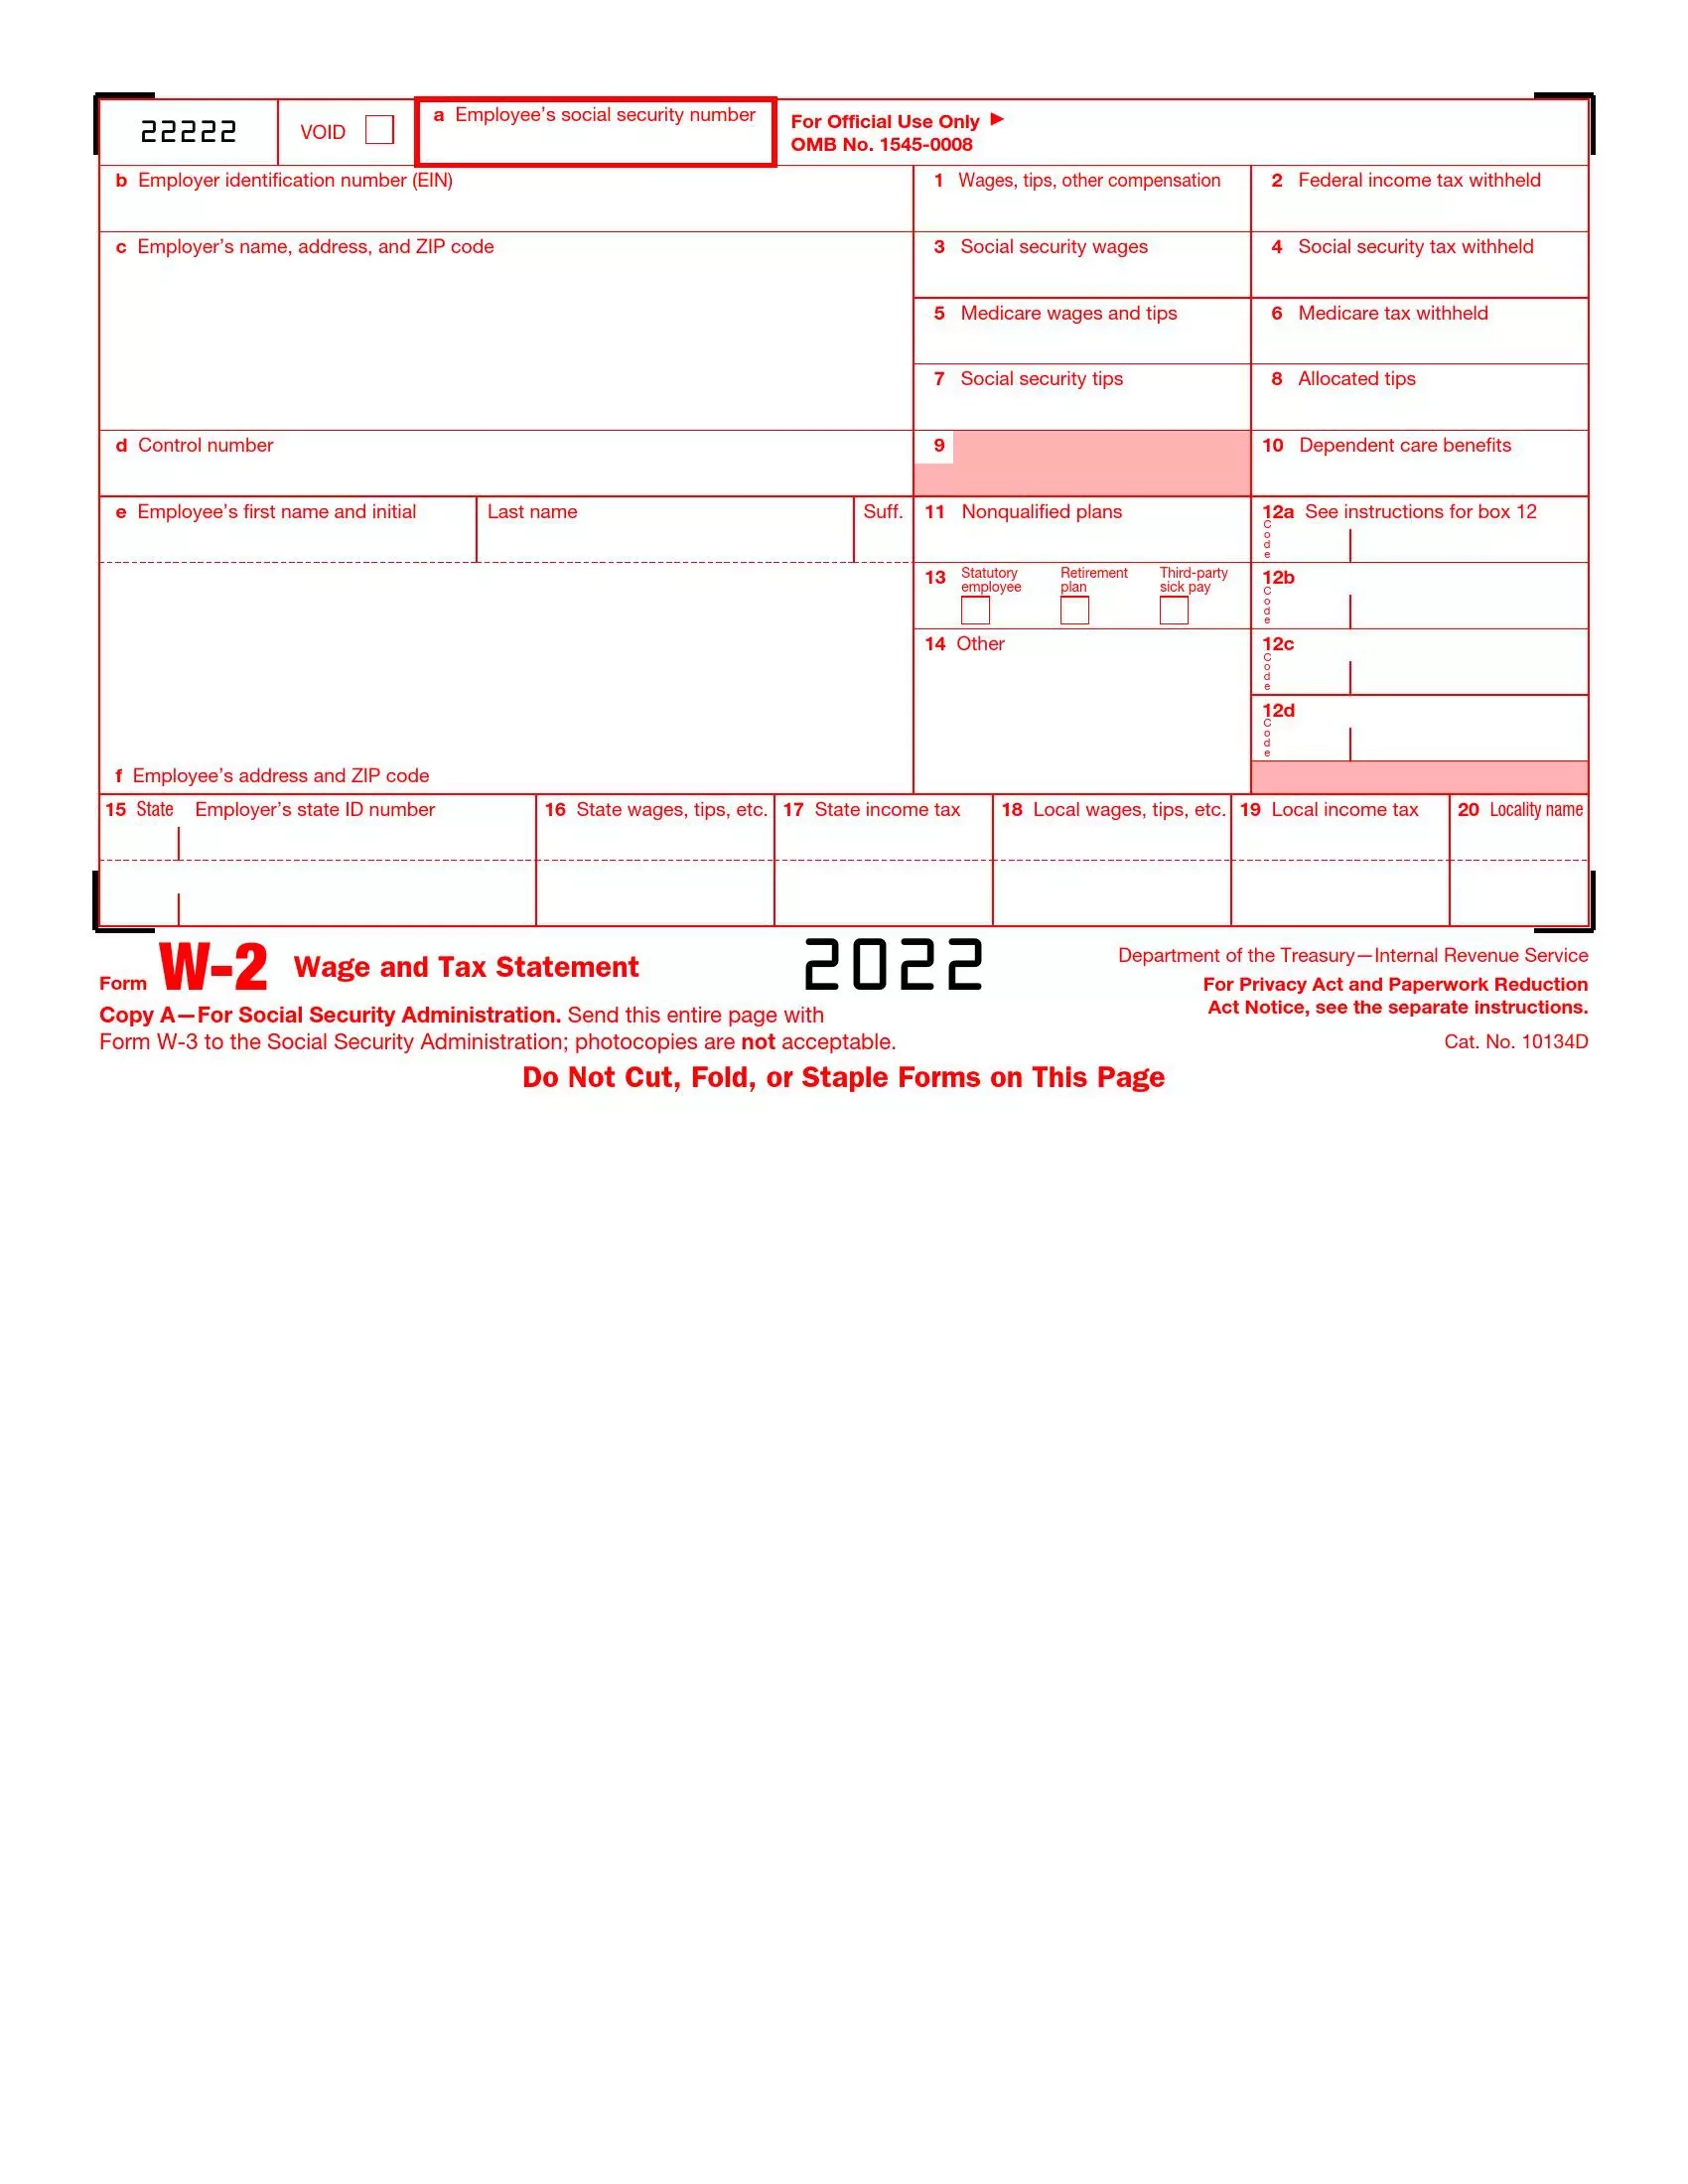 Irs Form W-2 ≡ Fill Out Printable Pdf Forms Online inside 2022 W2 Forms